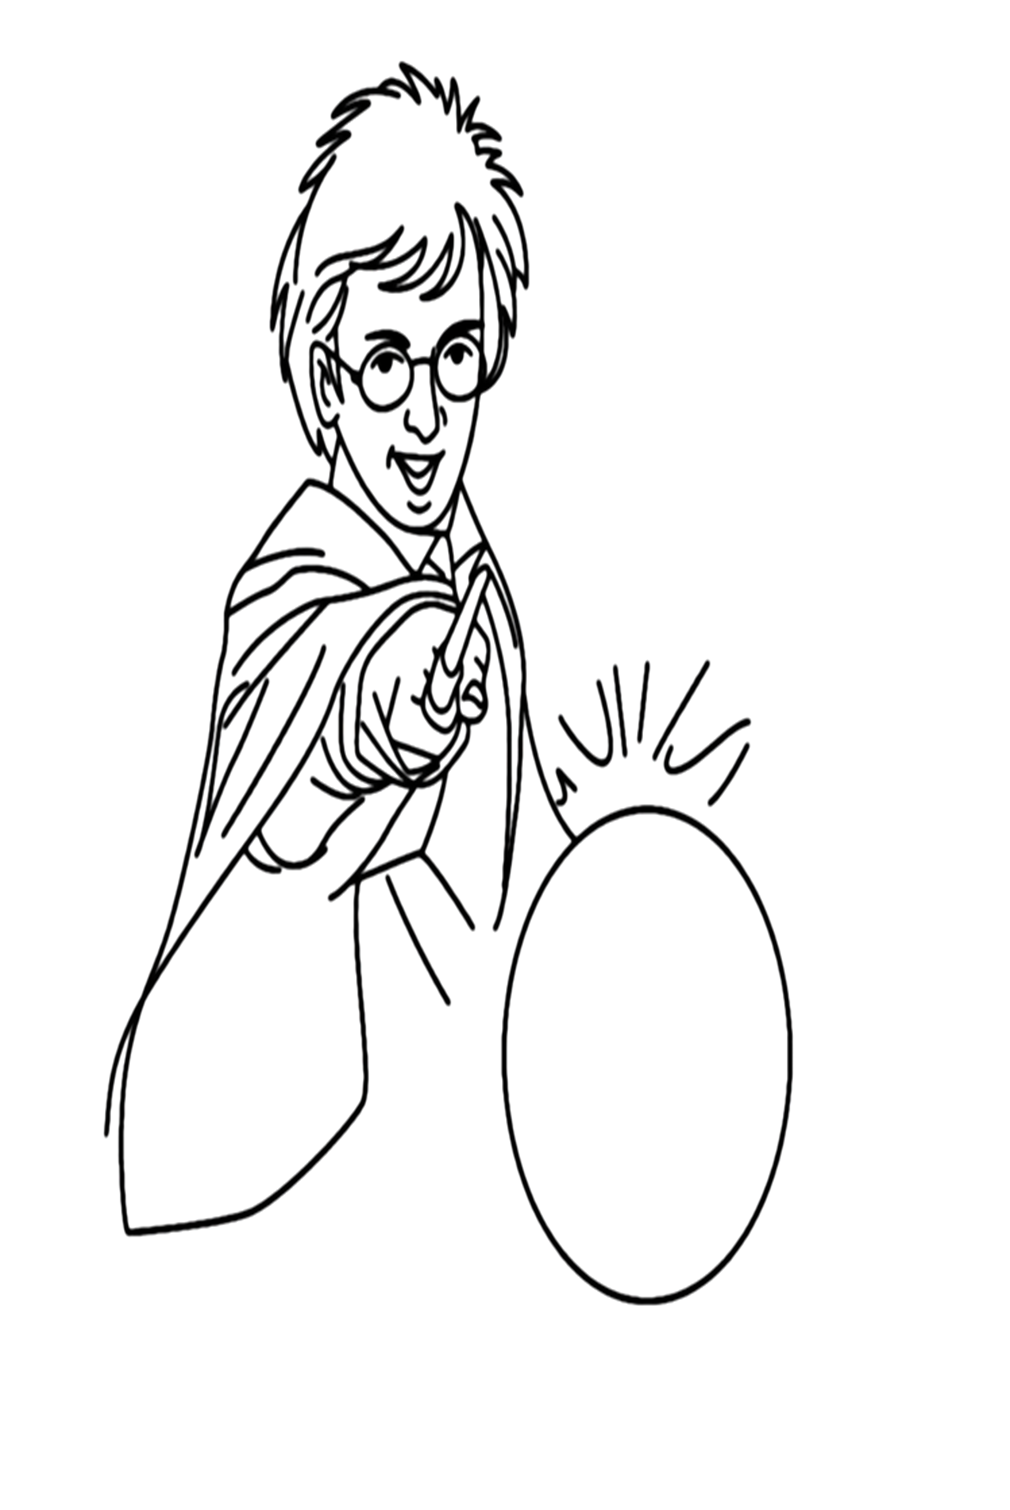 Harry Poter Image To Color Coloring Pages